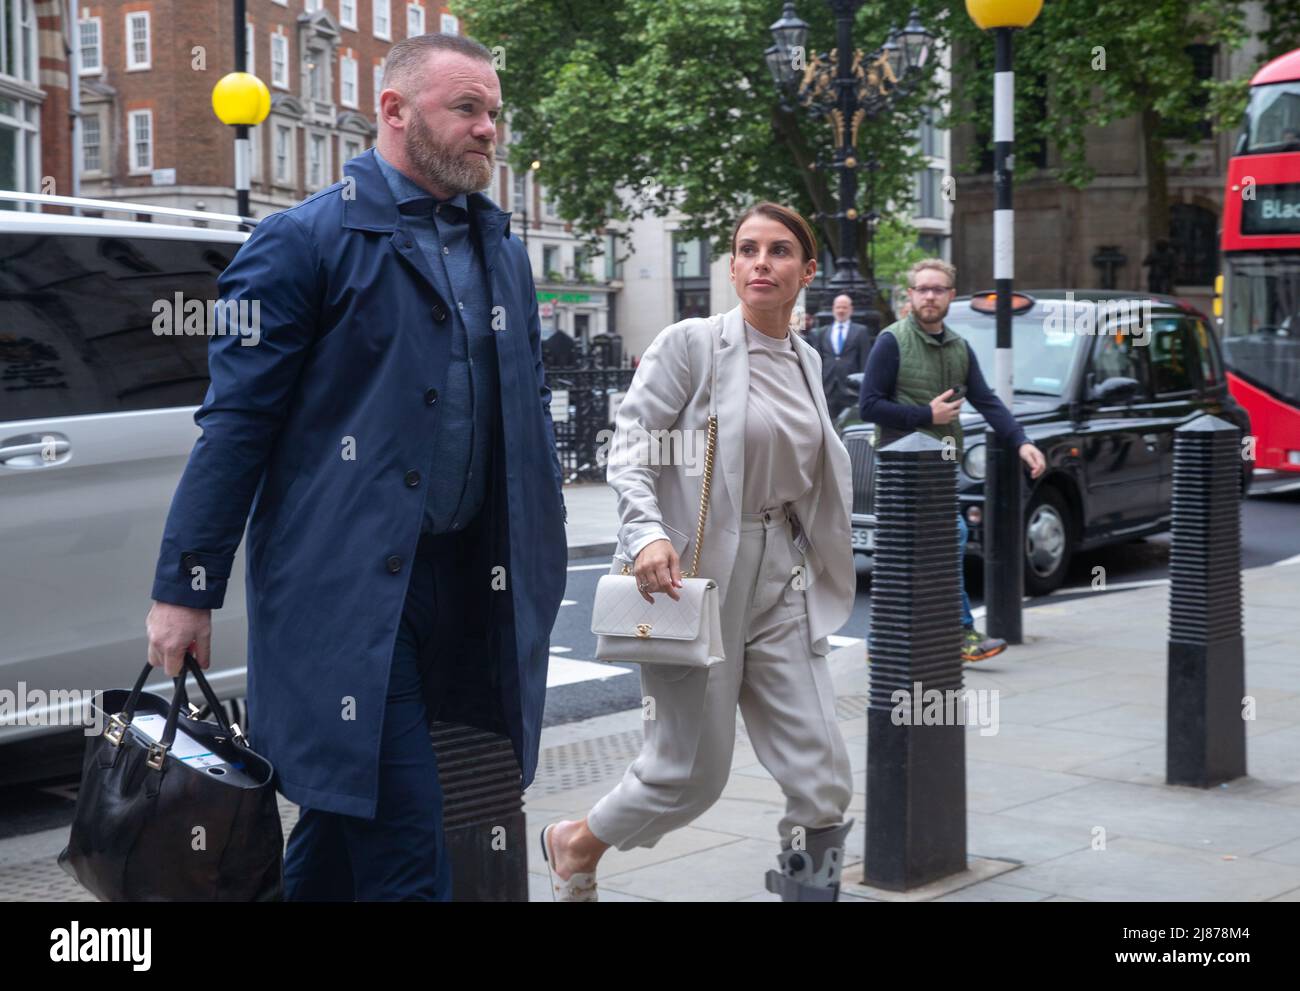 London, UK. 13th May, 2022. Coleen Rooney arrives at The Royal Courts of Justice for her libel case with Rebekah Vardy, Coleen Rooney who is the wife of Derby County manager and former England football player Wayne Rooney, and Rebekah Vardy, wife of Leicester City striker Jamie Vardy are locked in a libel battle also known as the 'Wagatha Christie' trial after accusations that Mrs Vardy leaked false stories about Mrs Rooney to the press. Credit: Lucy North/Alamy Live News Stock Photo